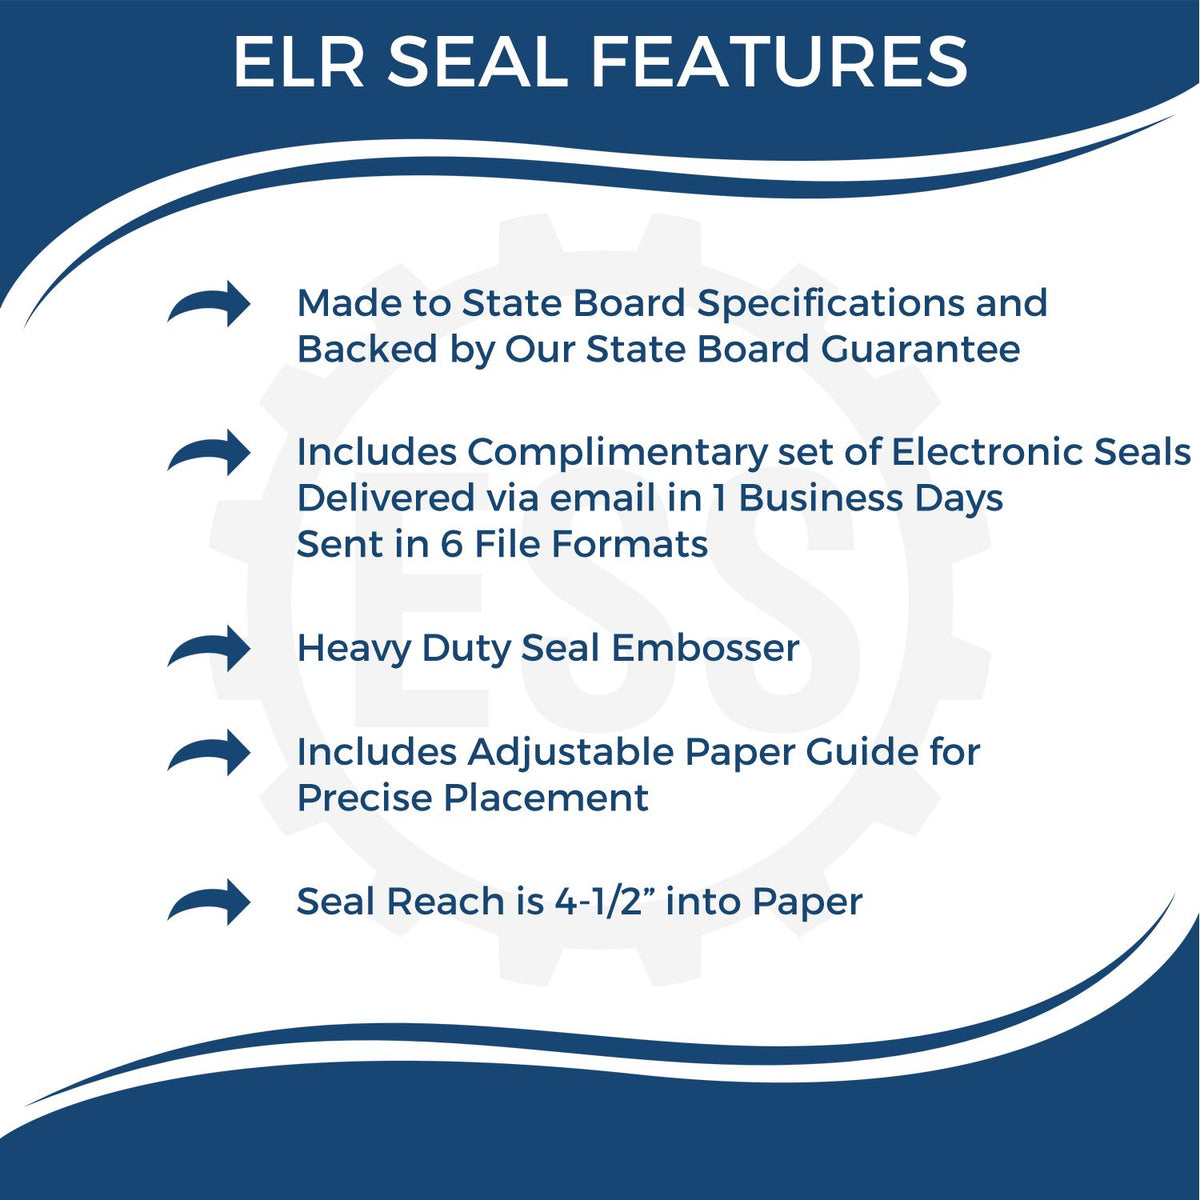 A picture of an infographic highlighting the selling points for the Extended Long Reach New Hampshire Architect Seal Embosser